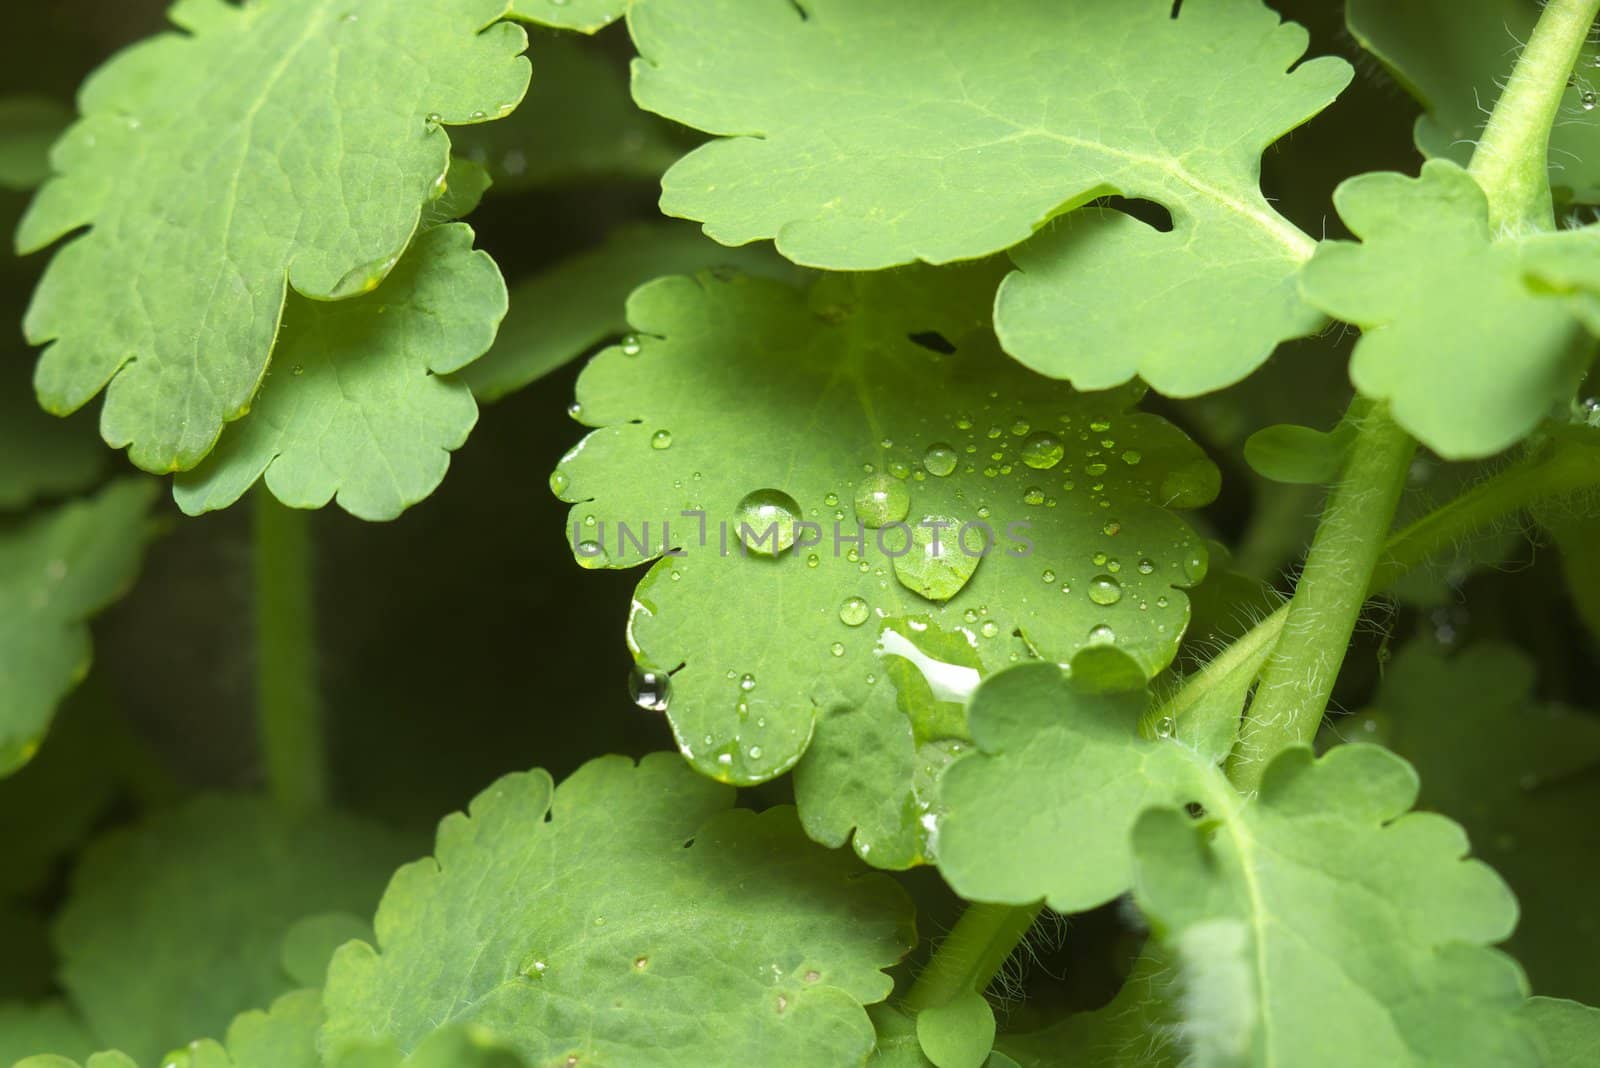 Water droplets on a fresh green leaf